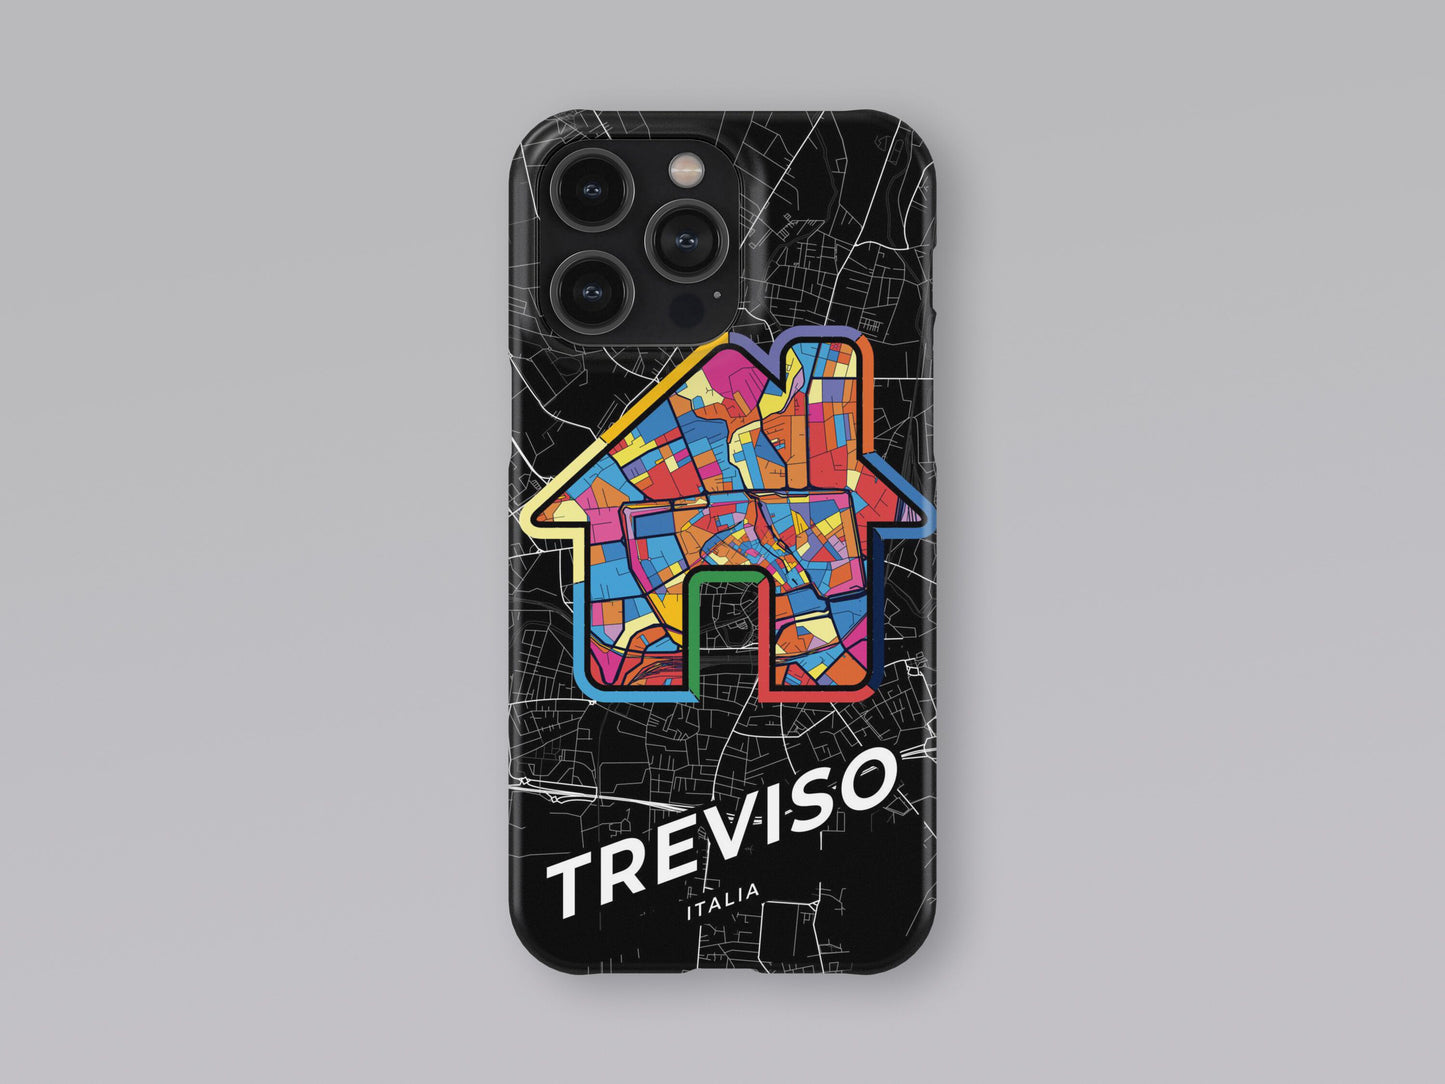 Treviso Italy slim phone case with colorful icon 3